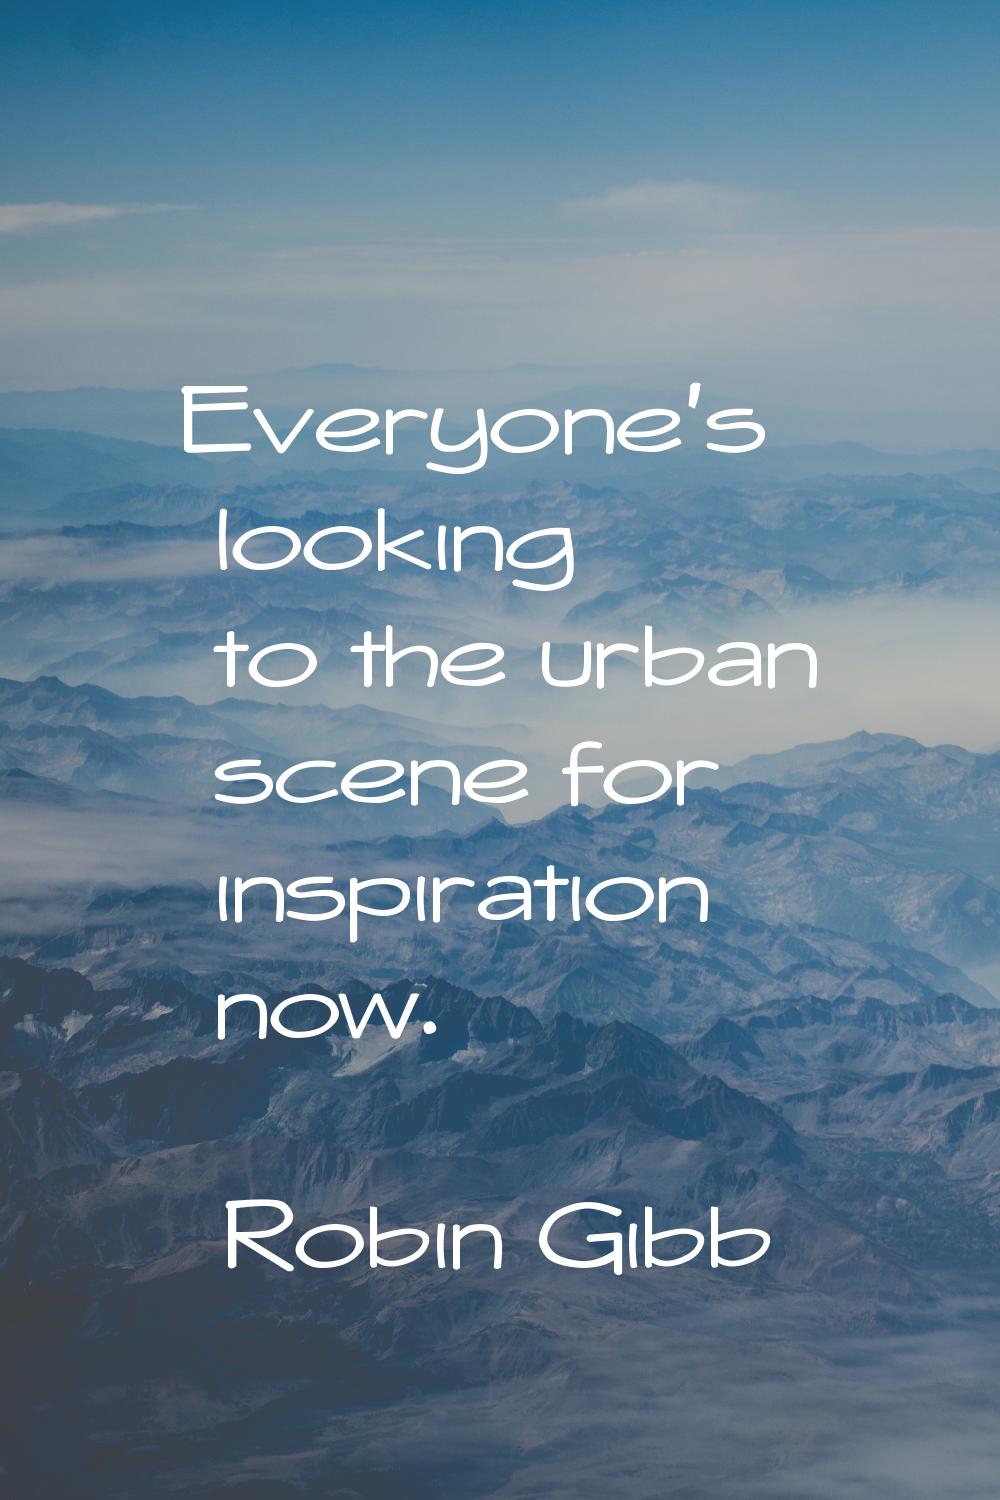 Everyone's looking to the urban scene for inspiration now.